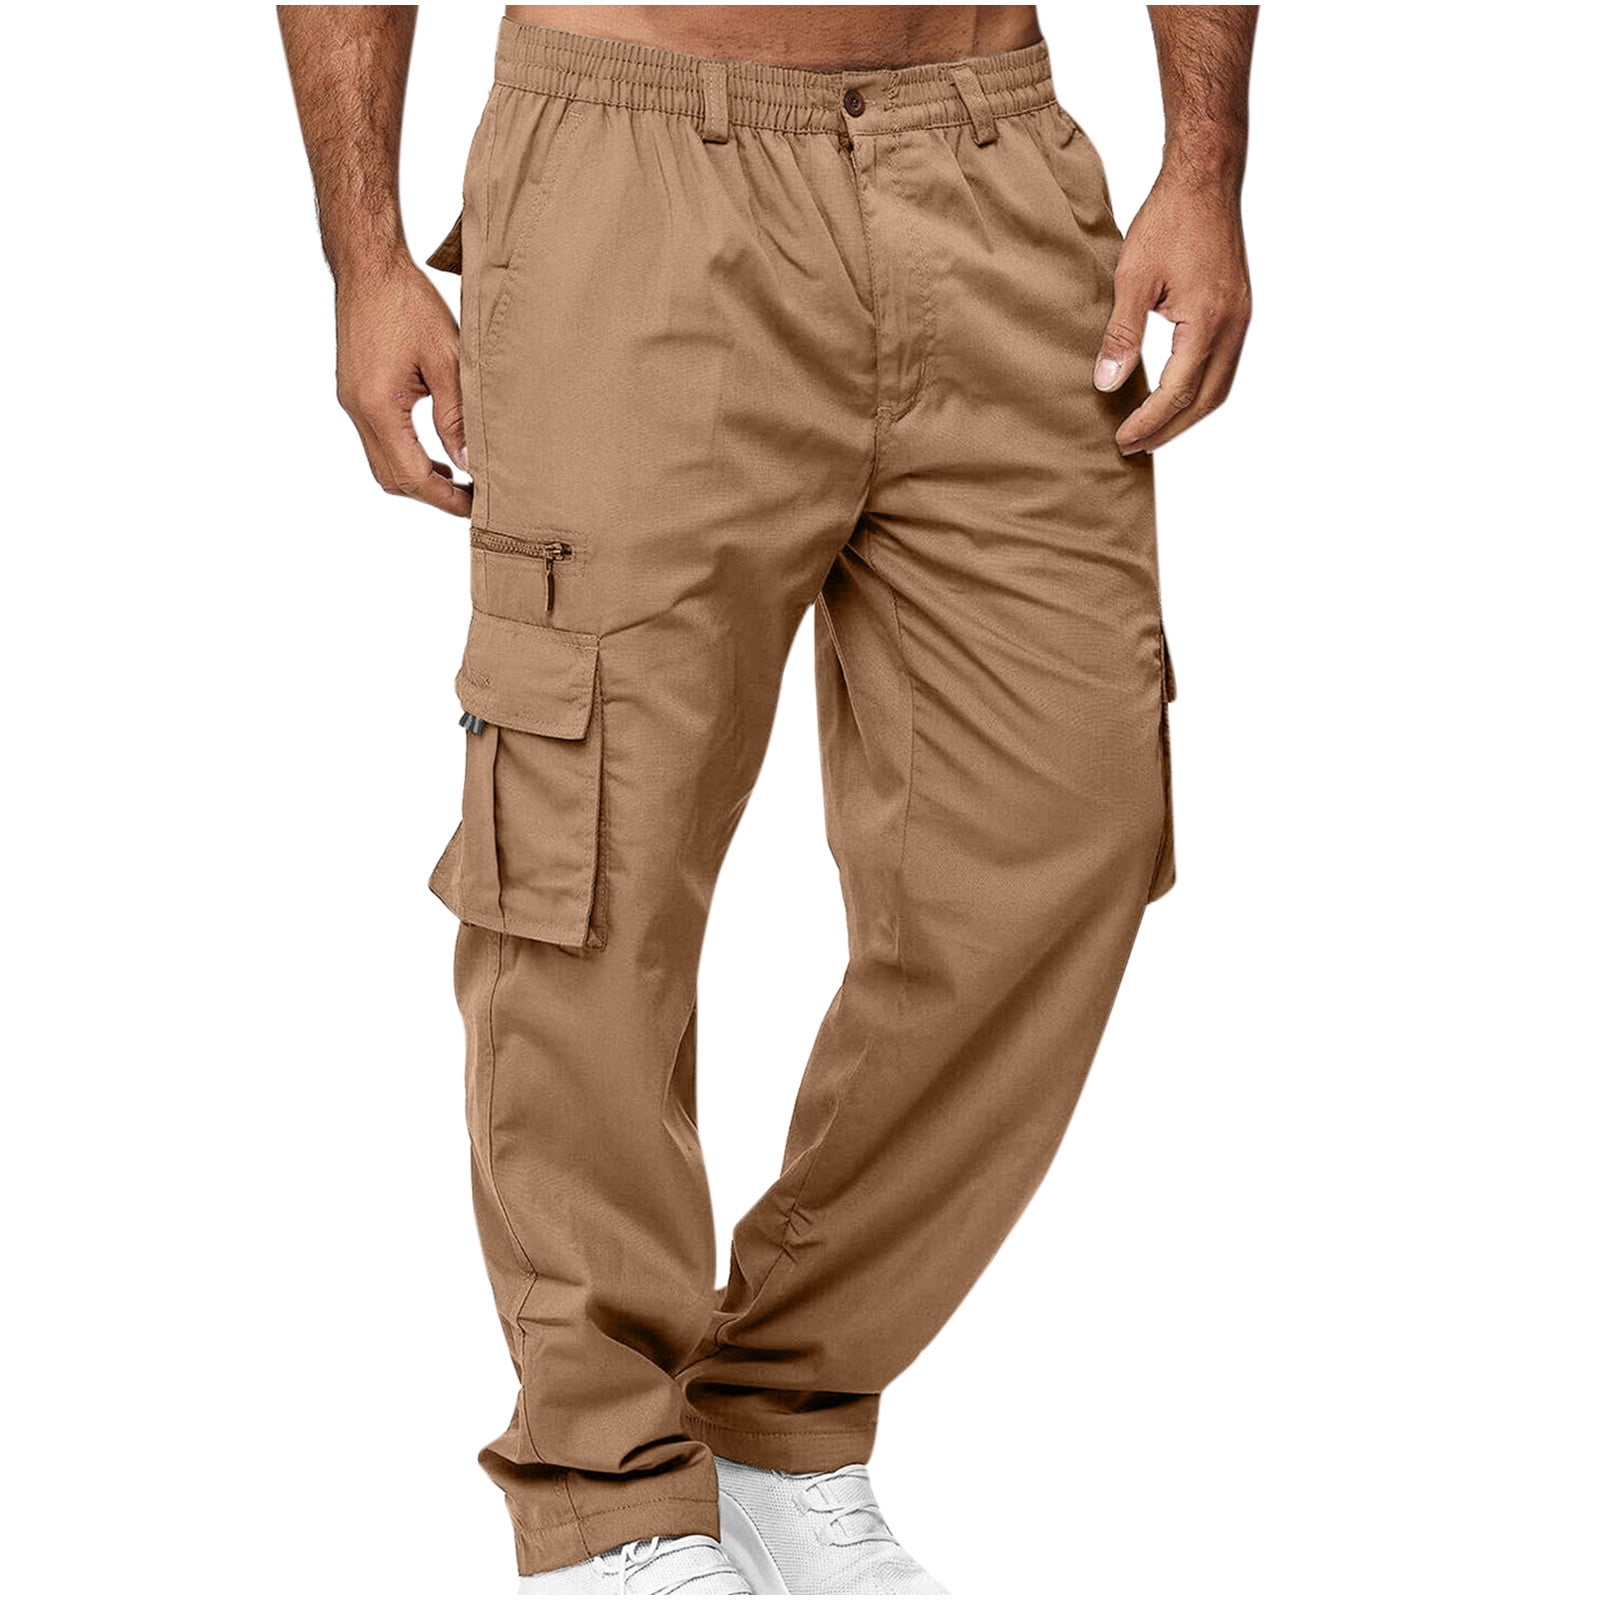 Mens Clothing Sale Clearance Mens Pants Casual Workout Hiking Sports Gym  Tractical Pants Active Elastic Waist Drawstring Pants Trousers with Multi  Pockets at Amazon Men's Clothing store